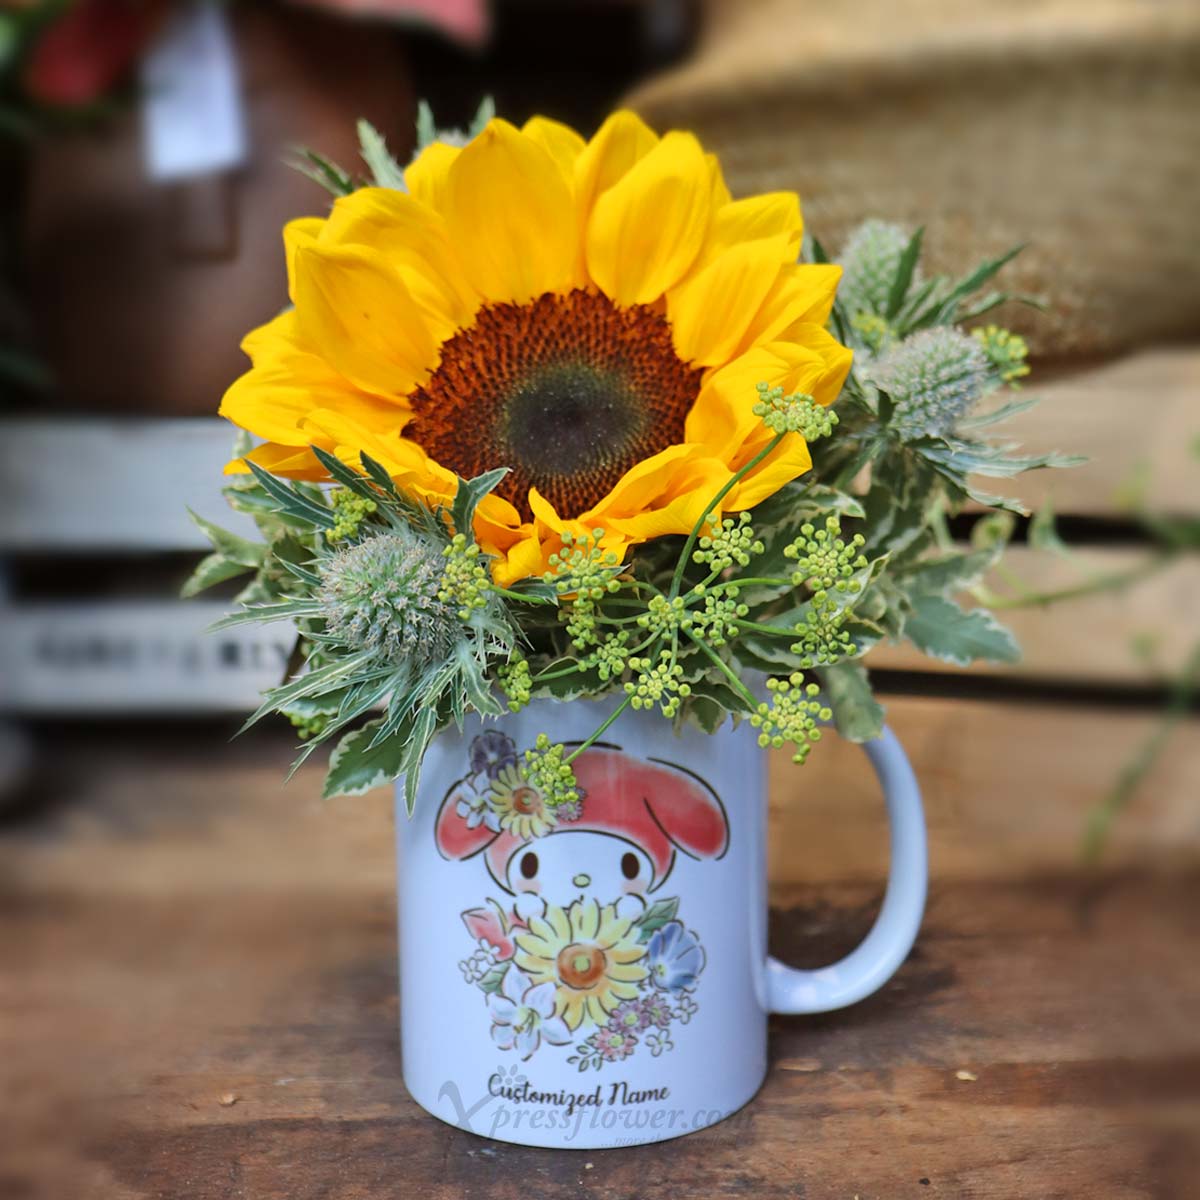 SNMG2304 Sunny Leo (Sunflower with My Melody Personalised Mug - Leo) 3a